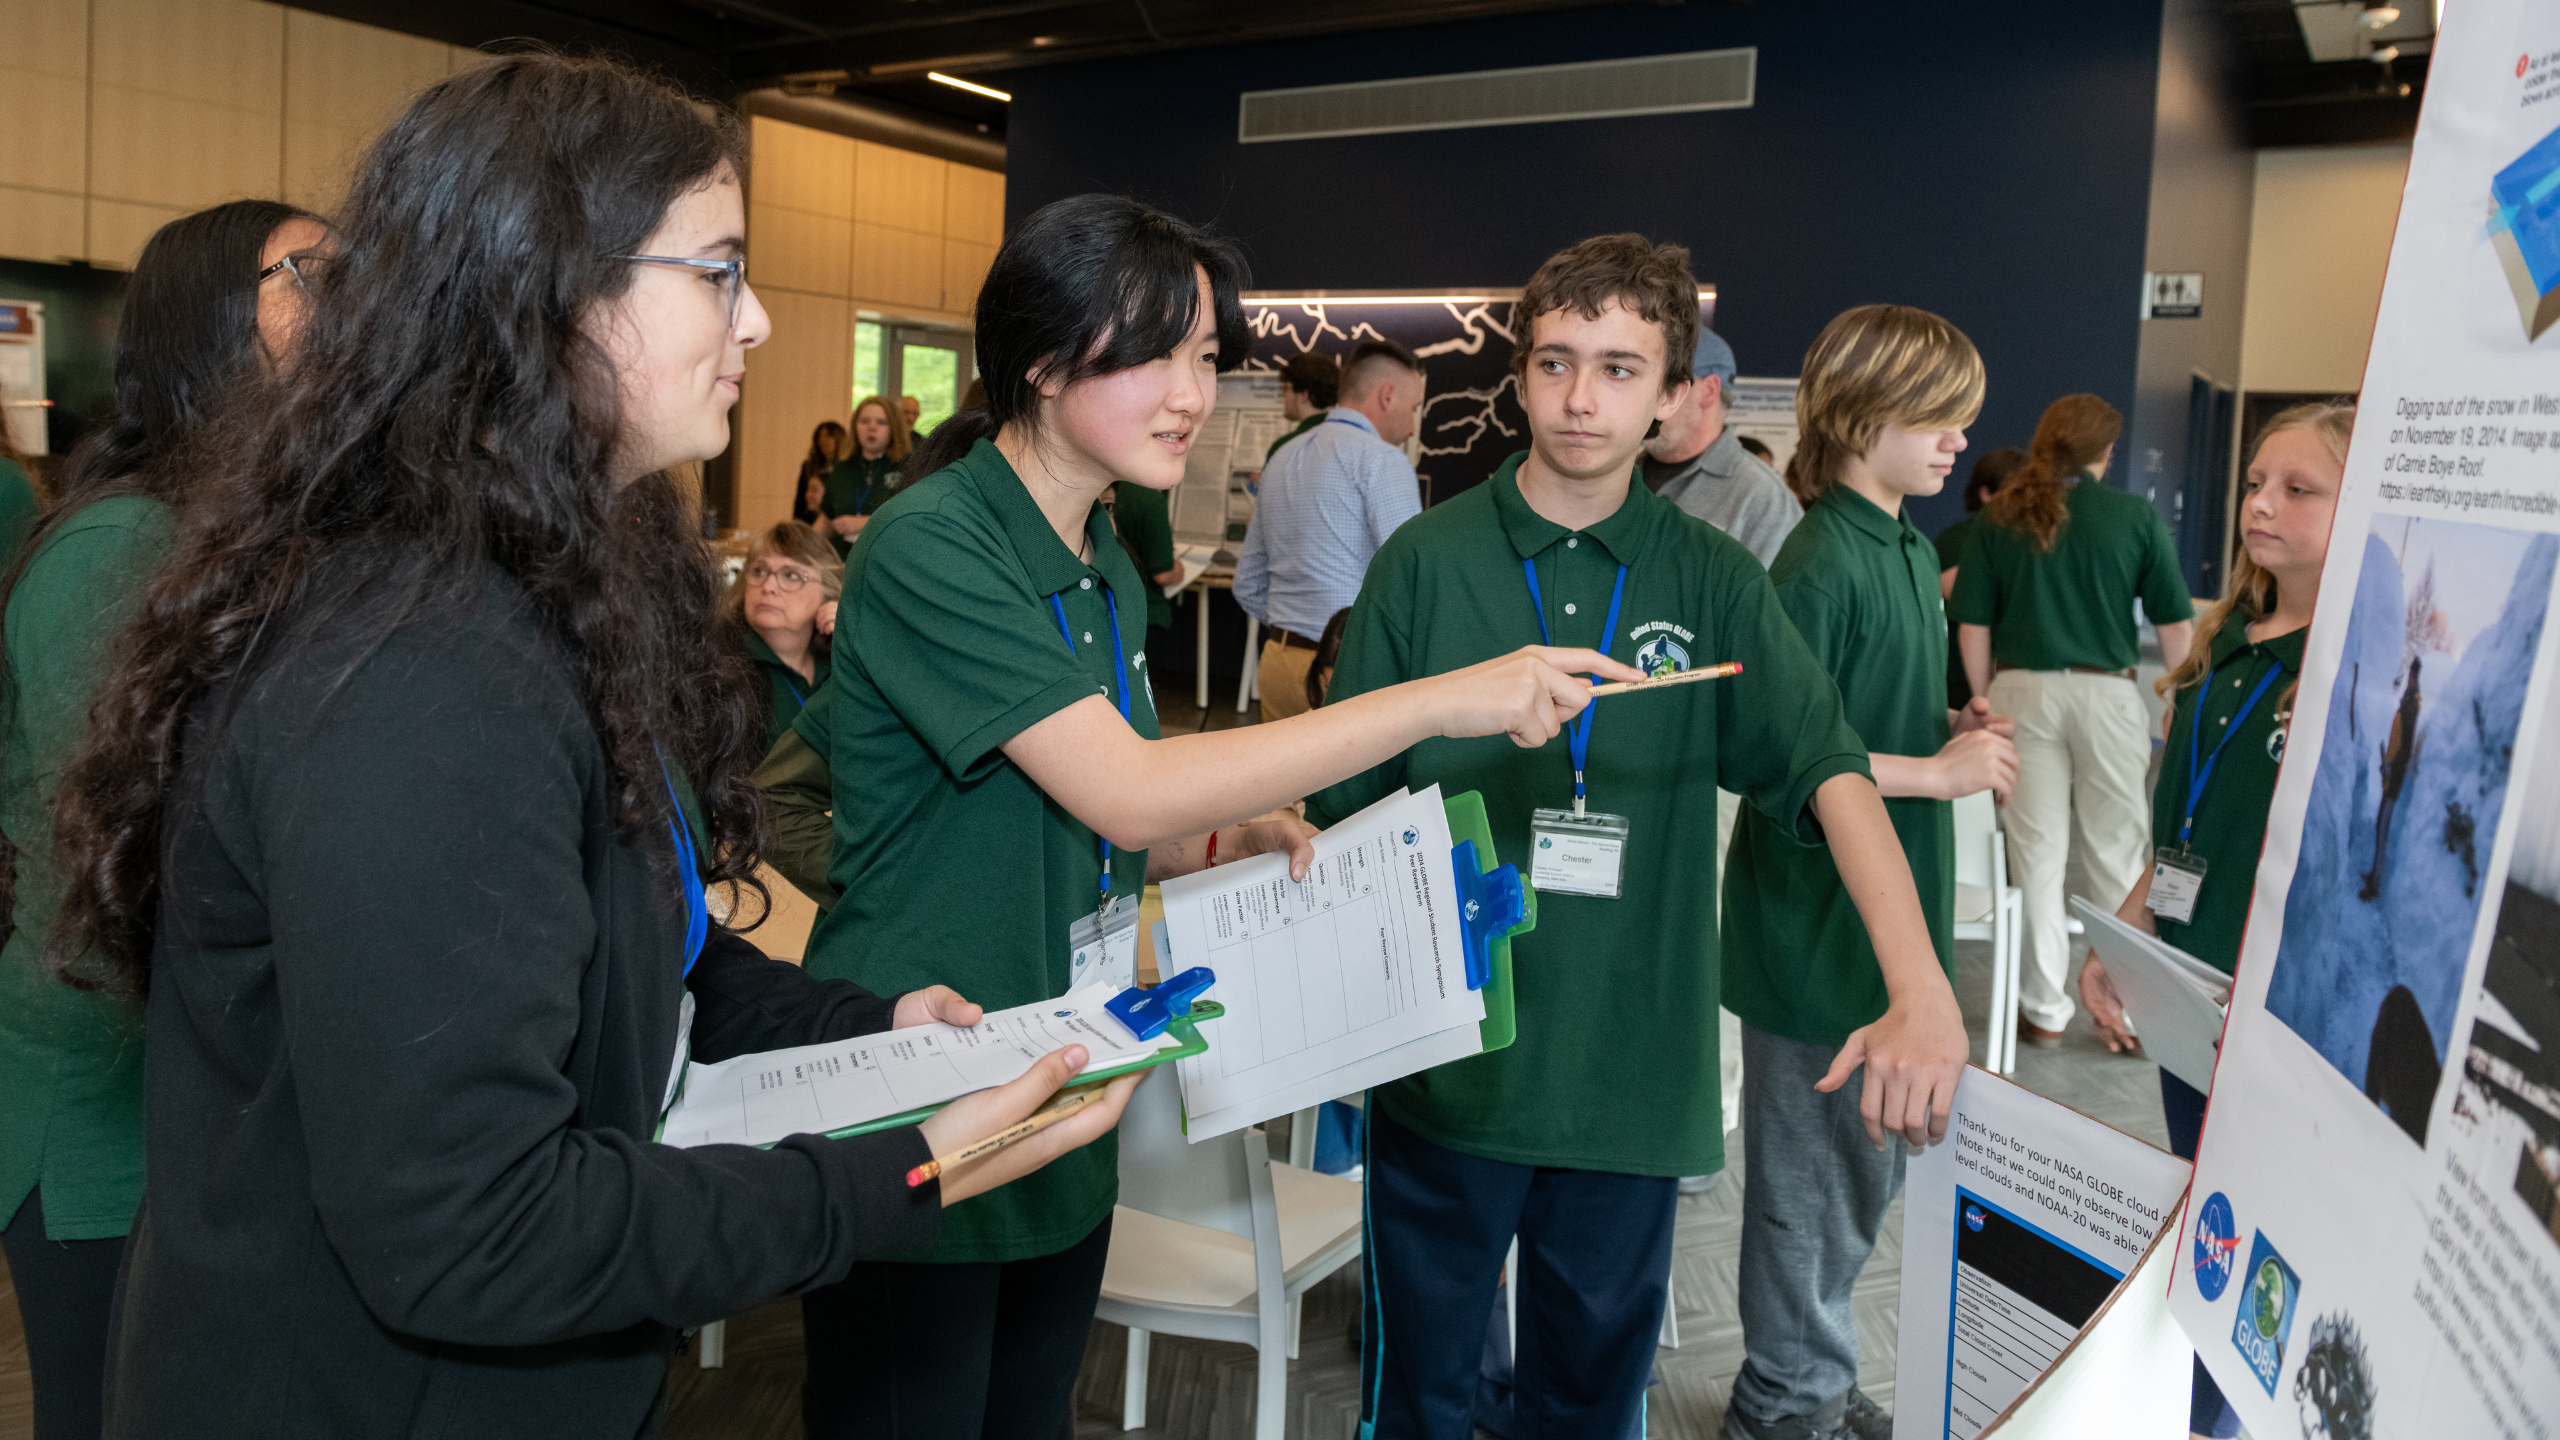 students reviewed each other's posters during the student research symposium (photo by Susan L. Angstadt)